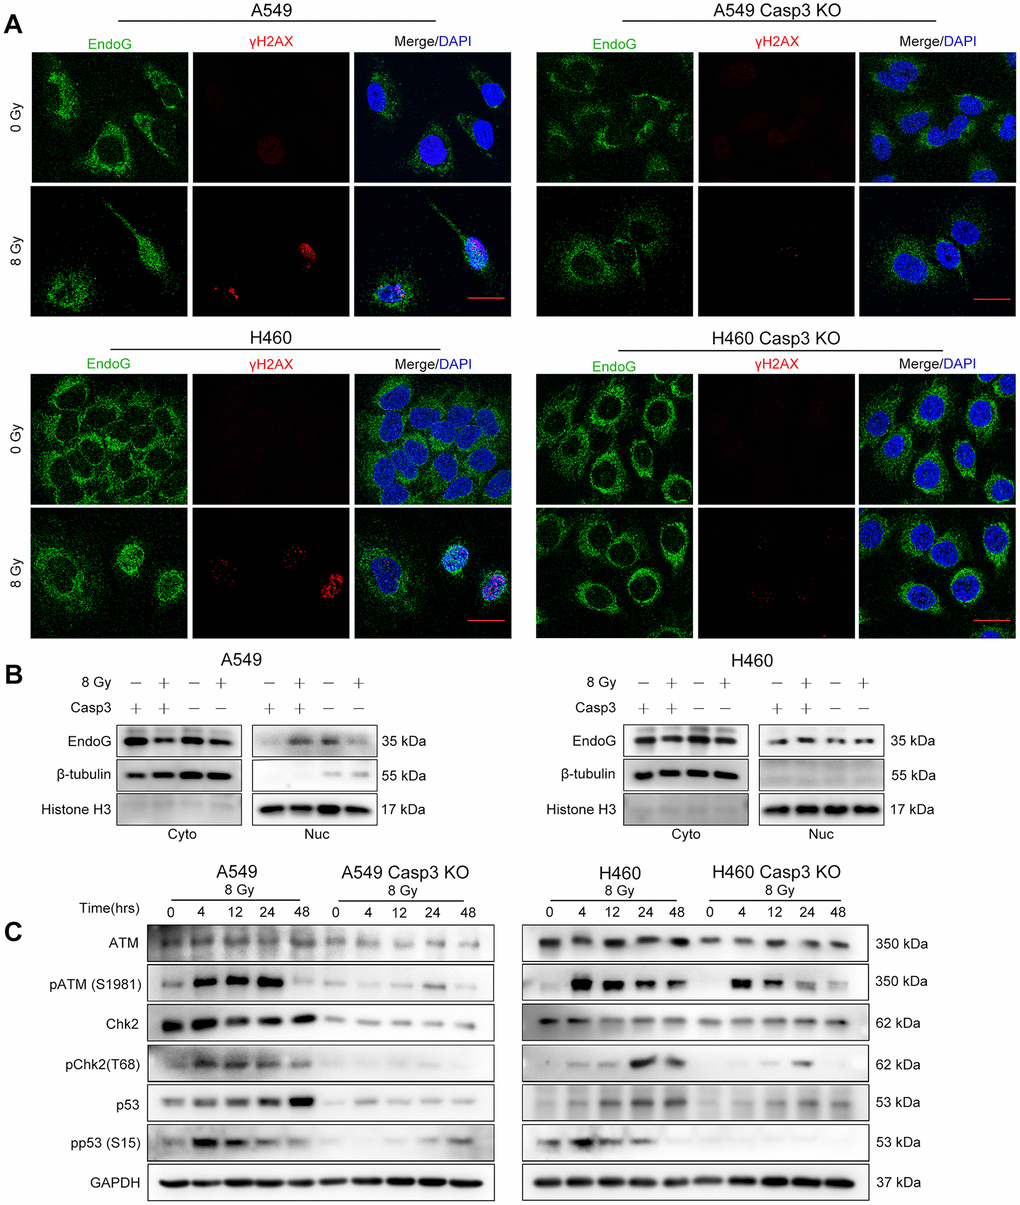 Casp3 KO attenuates the DDR via ATM/p53 signaling in irradiated NSCLC cells. (A) Immunofluorescence analysis of 8 Gy-irradiated wild-type and Casp3 KO NSCLC cells co-stained for EndoG and γH2AX foci at 48 h. Scale bars: 25 μm. (B) Western blot analysis of EndoG in the cytoplasmic and nuclear fractions of 8 Gy-irradiated wild-type and Casp3 KO NSCLC cells at 48 h. β-tubulin and Histone H3 were used as cytoplasmic and nuclear loading controls, respectively. (C) Levels of DNA damage response (DDR)-related proteins ATM, pATM (S1981), Chk2, pChk2 (T68), p53, and pp53 (S15) were measured by western blotting at indicated times after 8 Gy irradiation of wild-type and Casp3 KO NSCLC cells. GAPDH was used as the loading control.